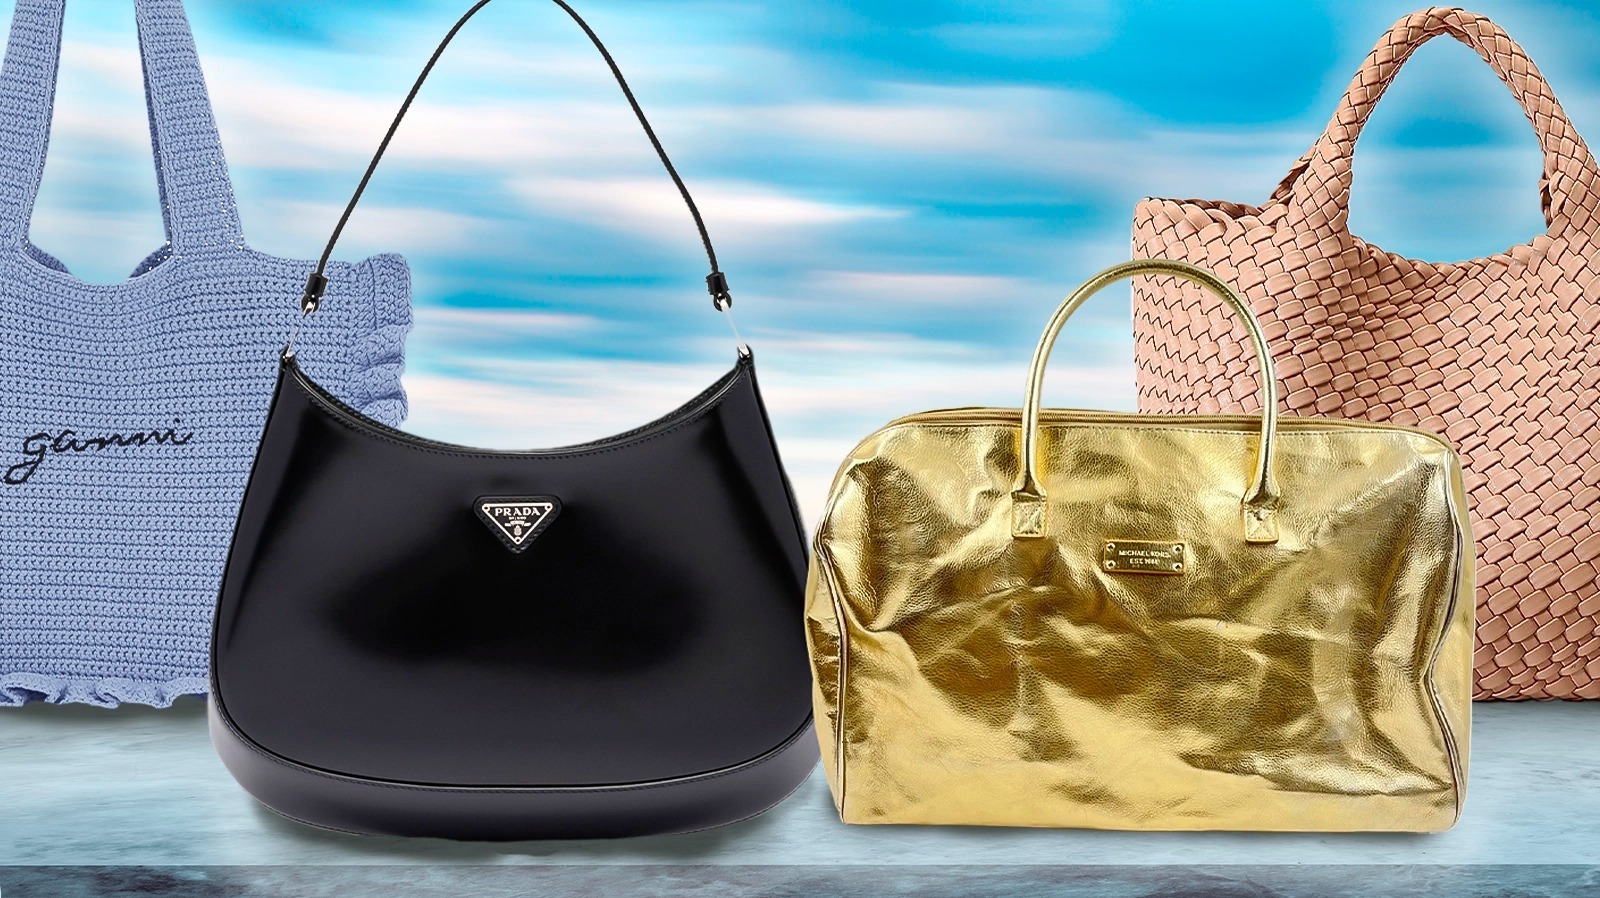 17 Handbag Trends You'll Want To Carry With You Everywhere In 2023